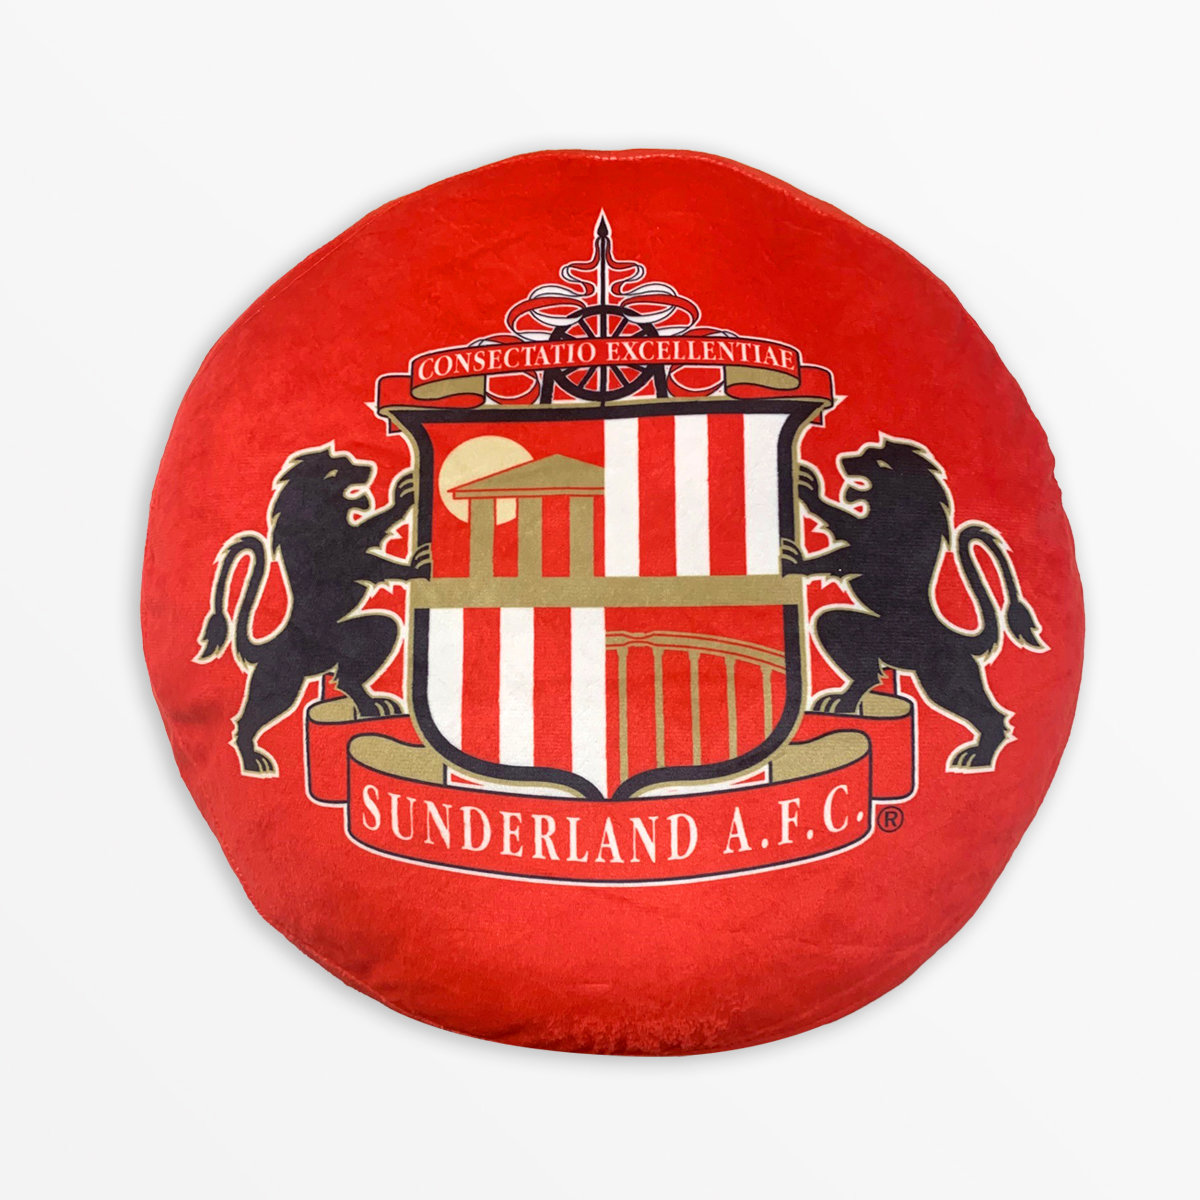 Buy the Football Cushion online at Sunderland AFC Store